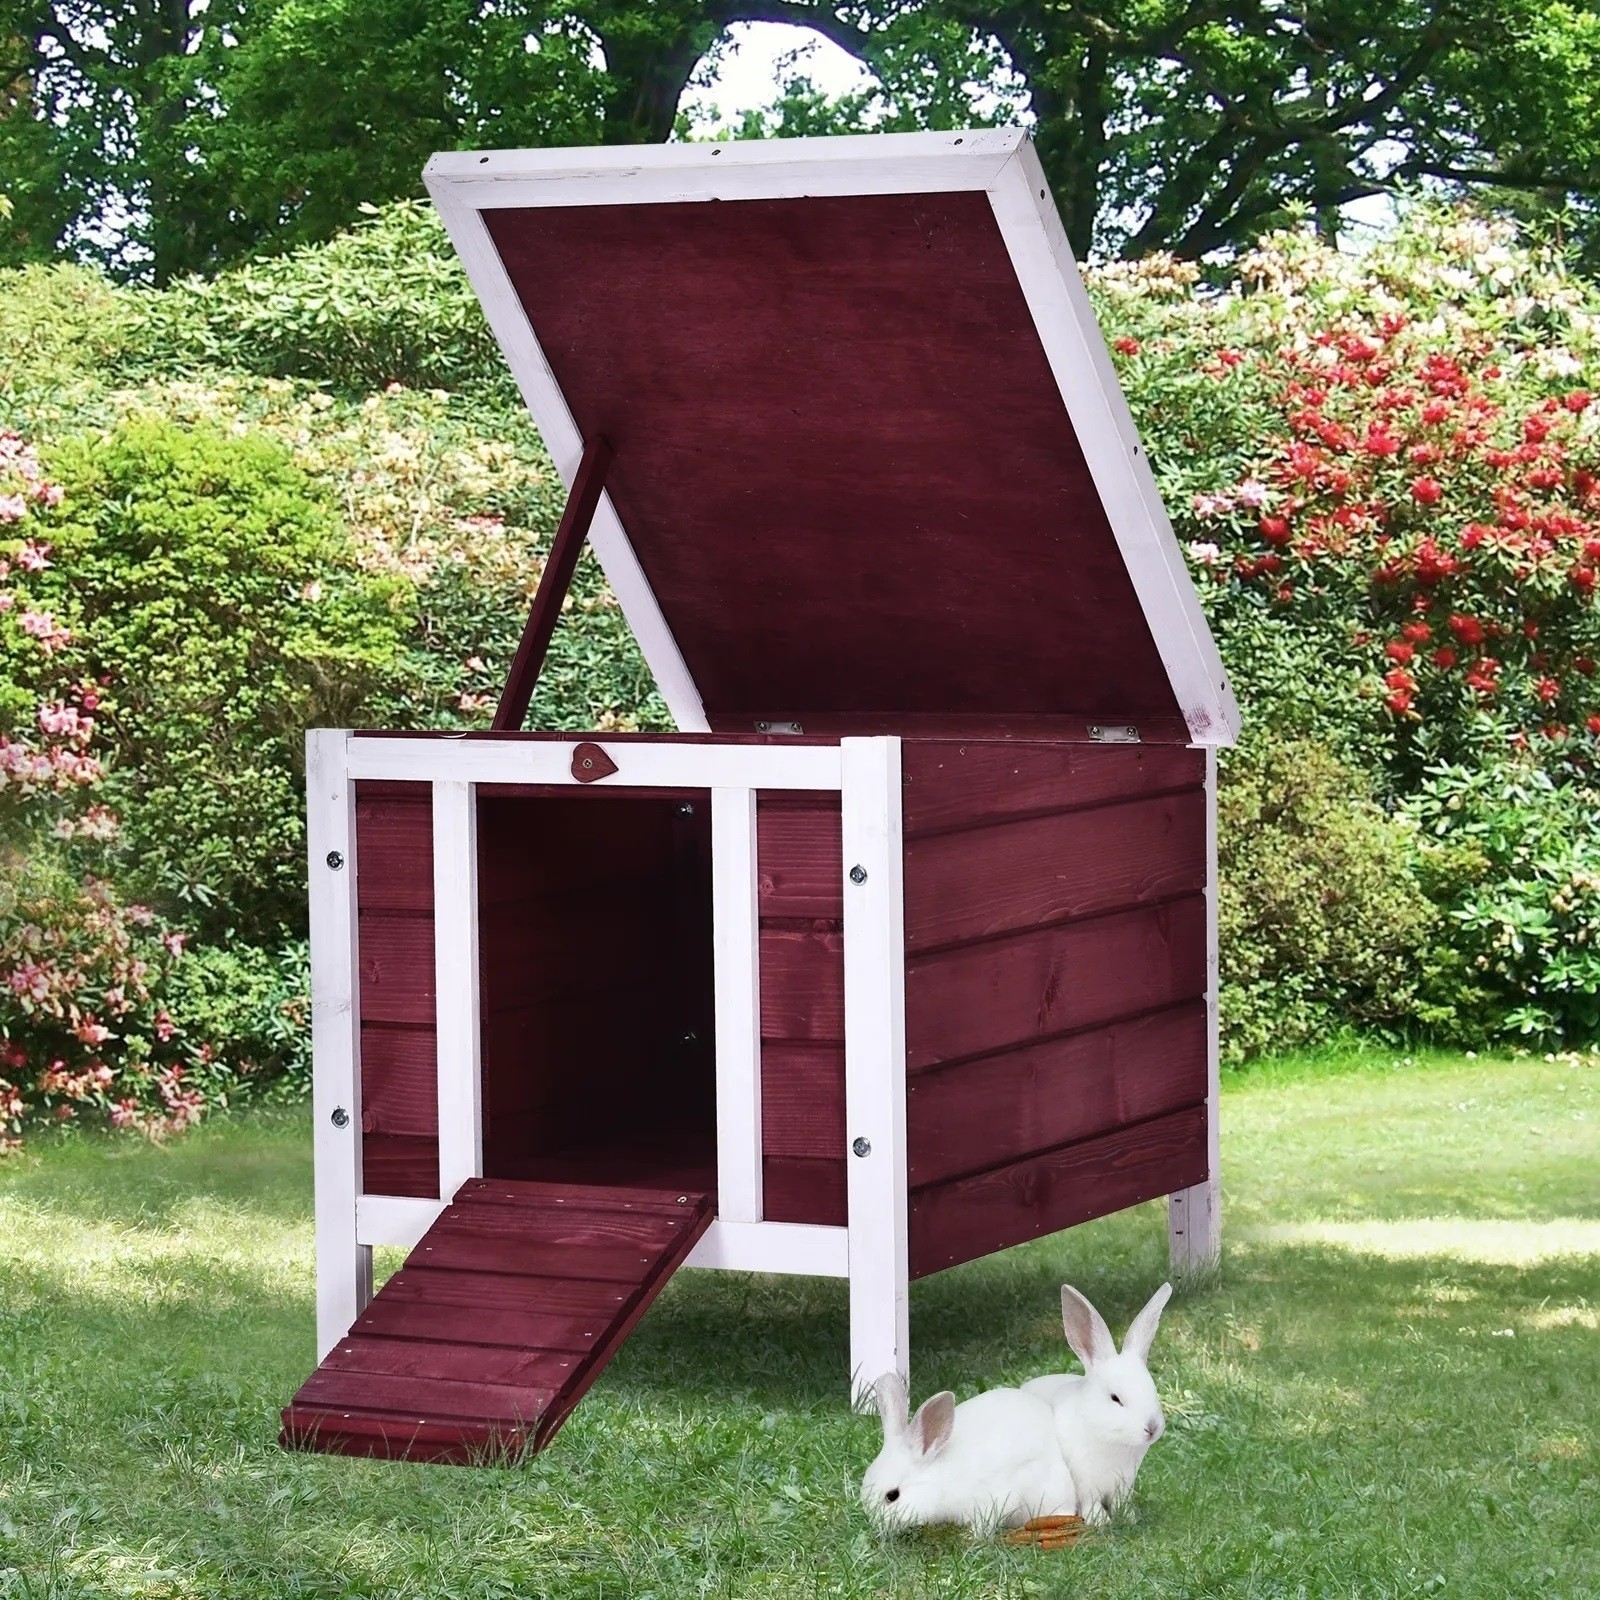 PawHut Raised Wooden Pet House for Rabbits, Cats, & Other Small Animals